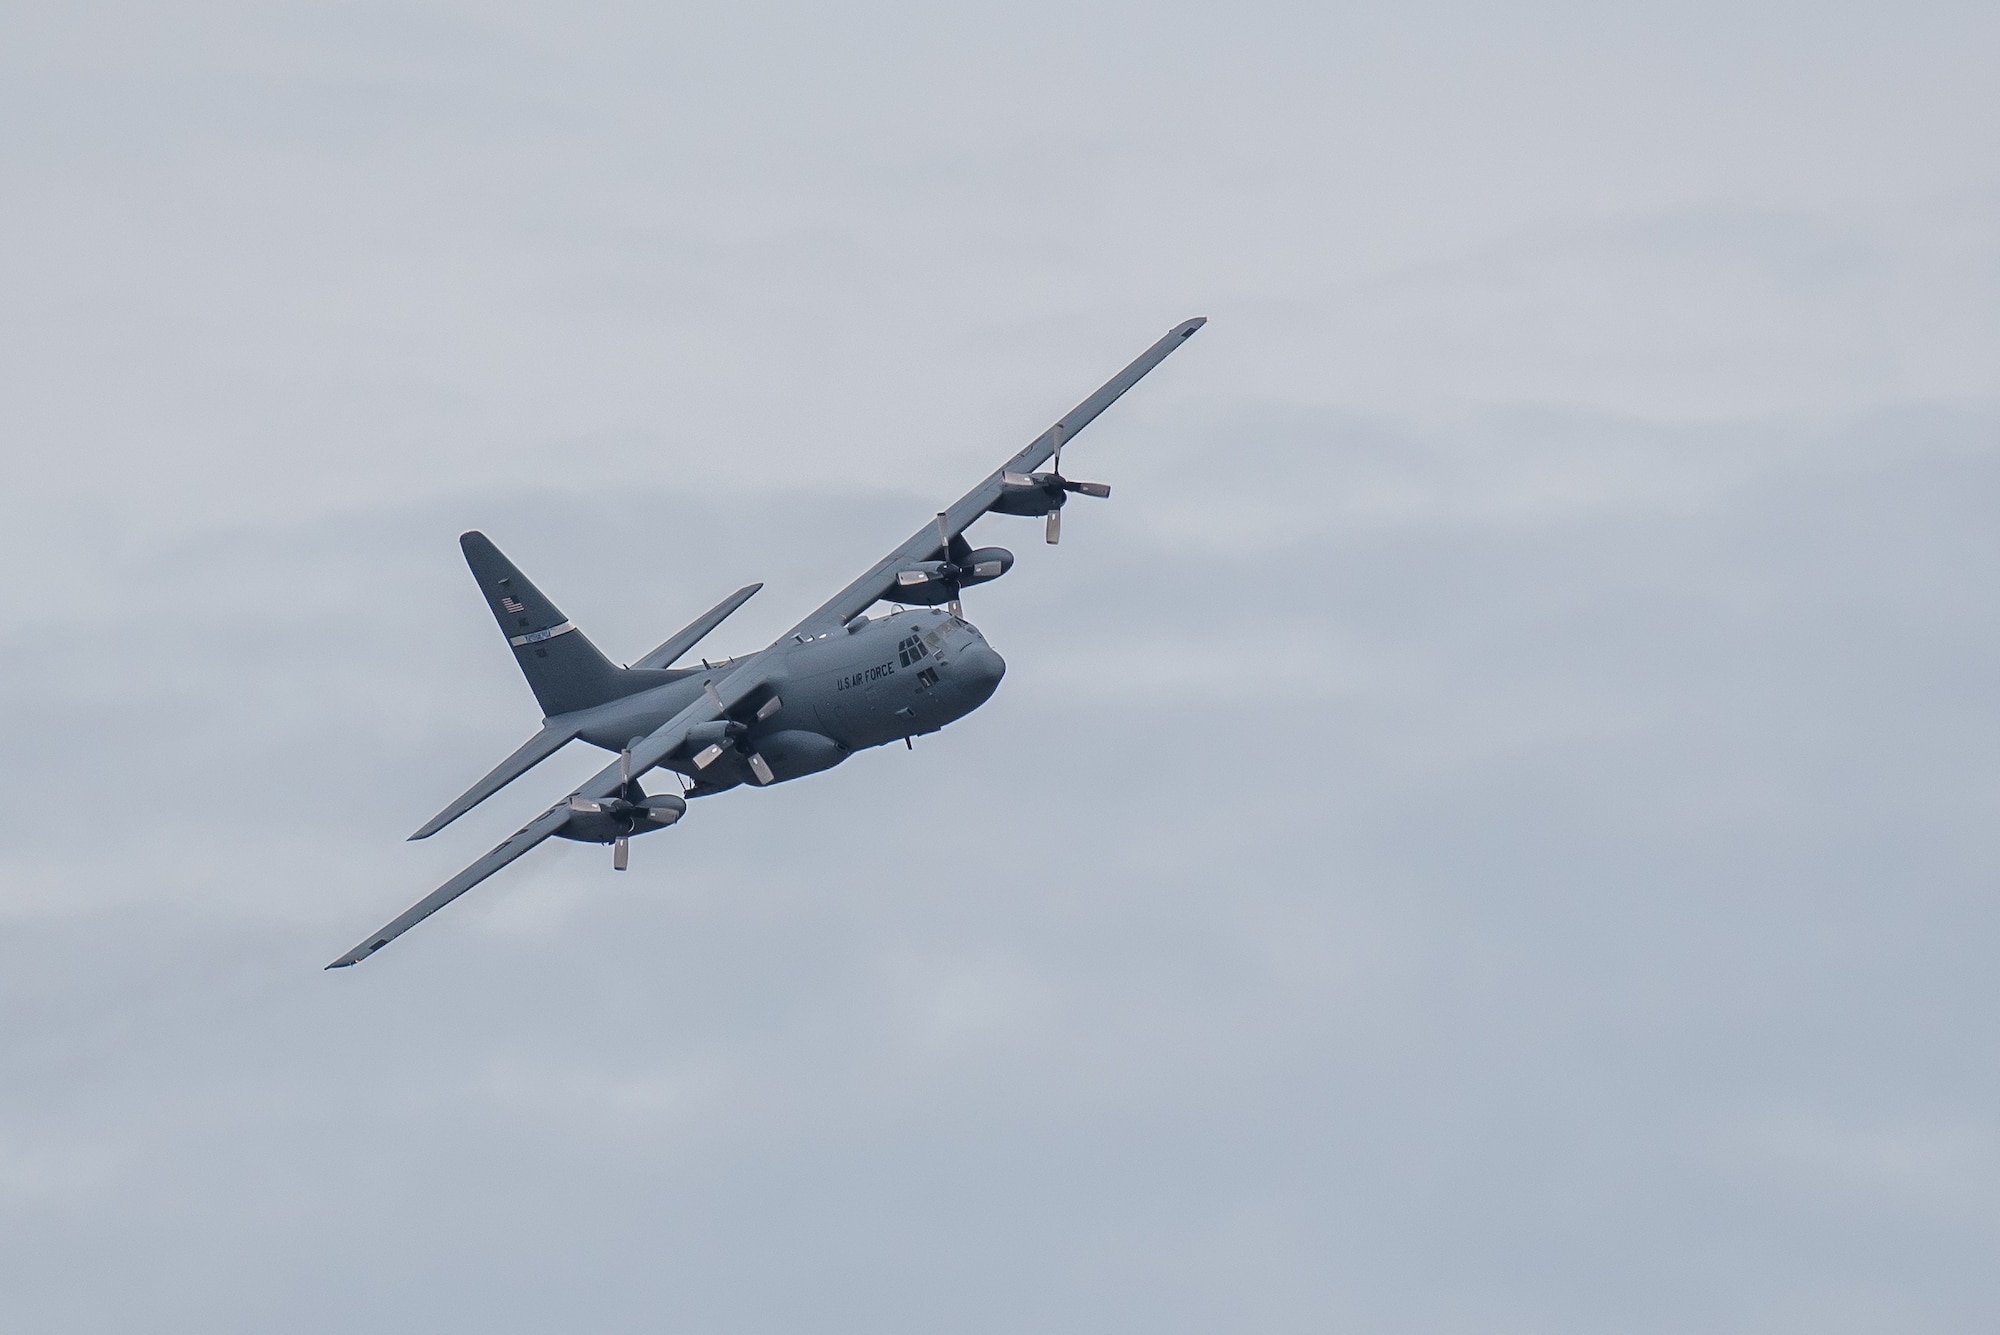 A Kentucky Air National Guard C-130 Hercules aircraft approaches the Ohio River in preparation for a cargo-drop demonstration as part of the Thunder Over Louisville airshow in Louisville, Ky., April 13, 2019. Hundreds of thousands of spectators turned out to view the annual event, which has grown to become one of the largest single-day air shows in North America. (U.S. Air National Guard photo by Dale Greer)